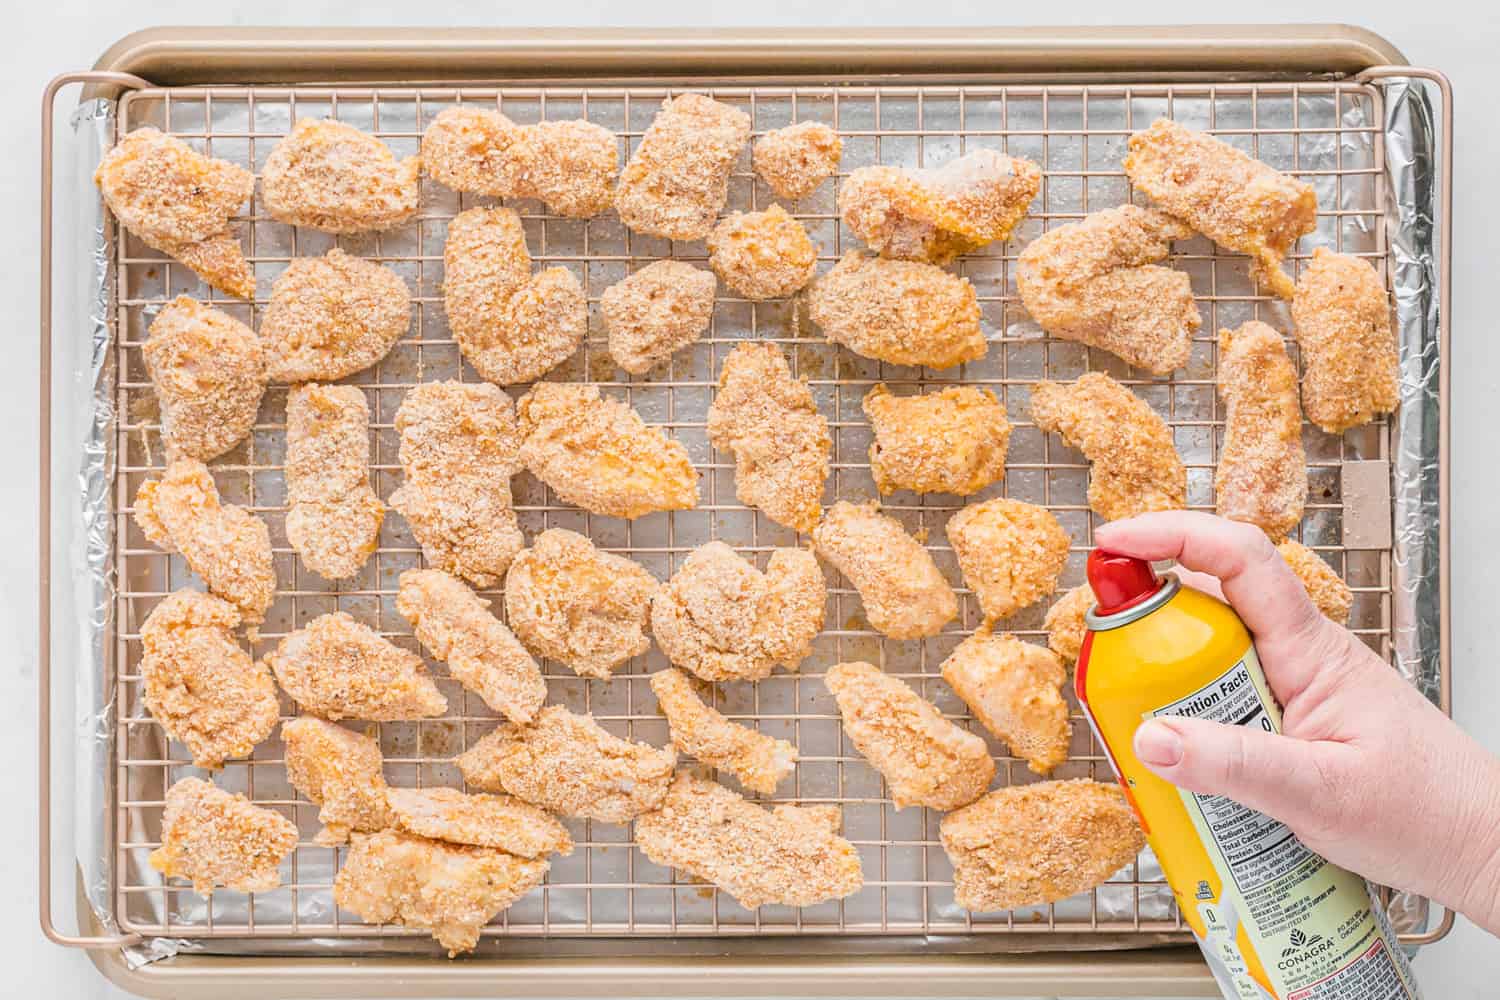 Unbaked chicken nuggets on baking rack.